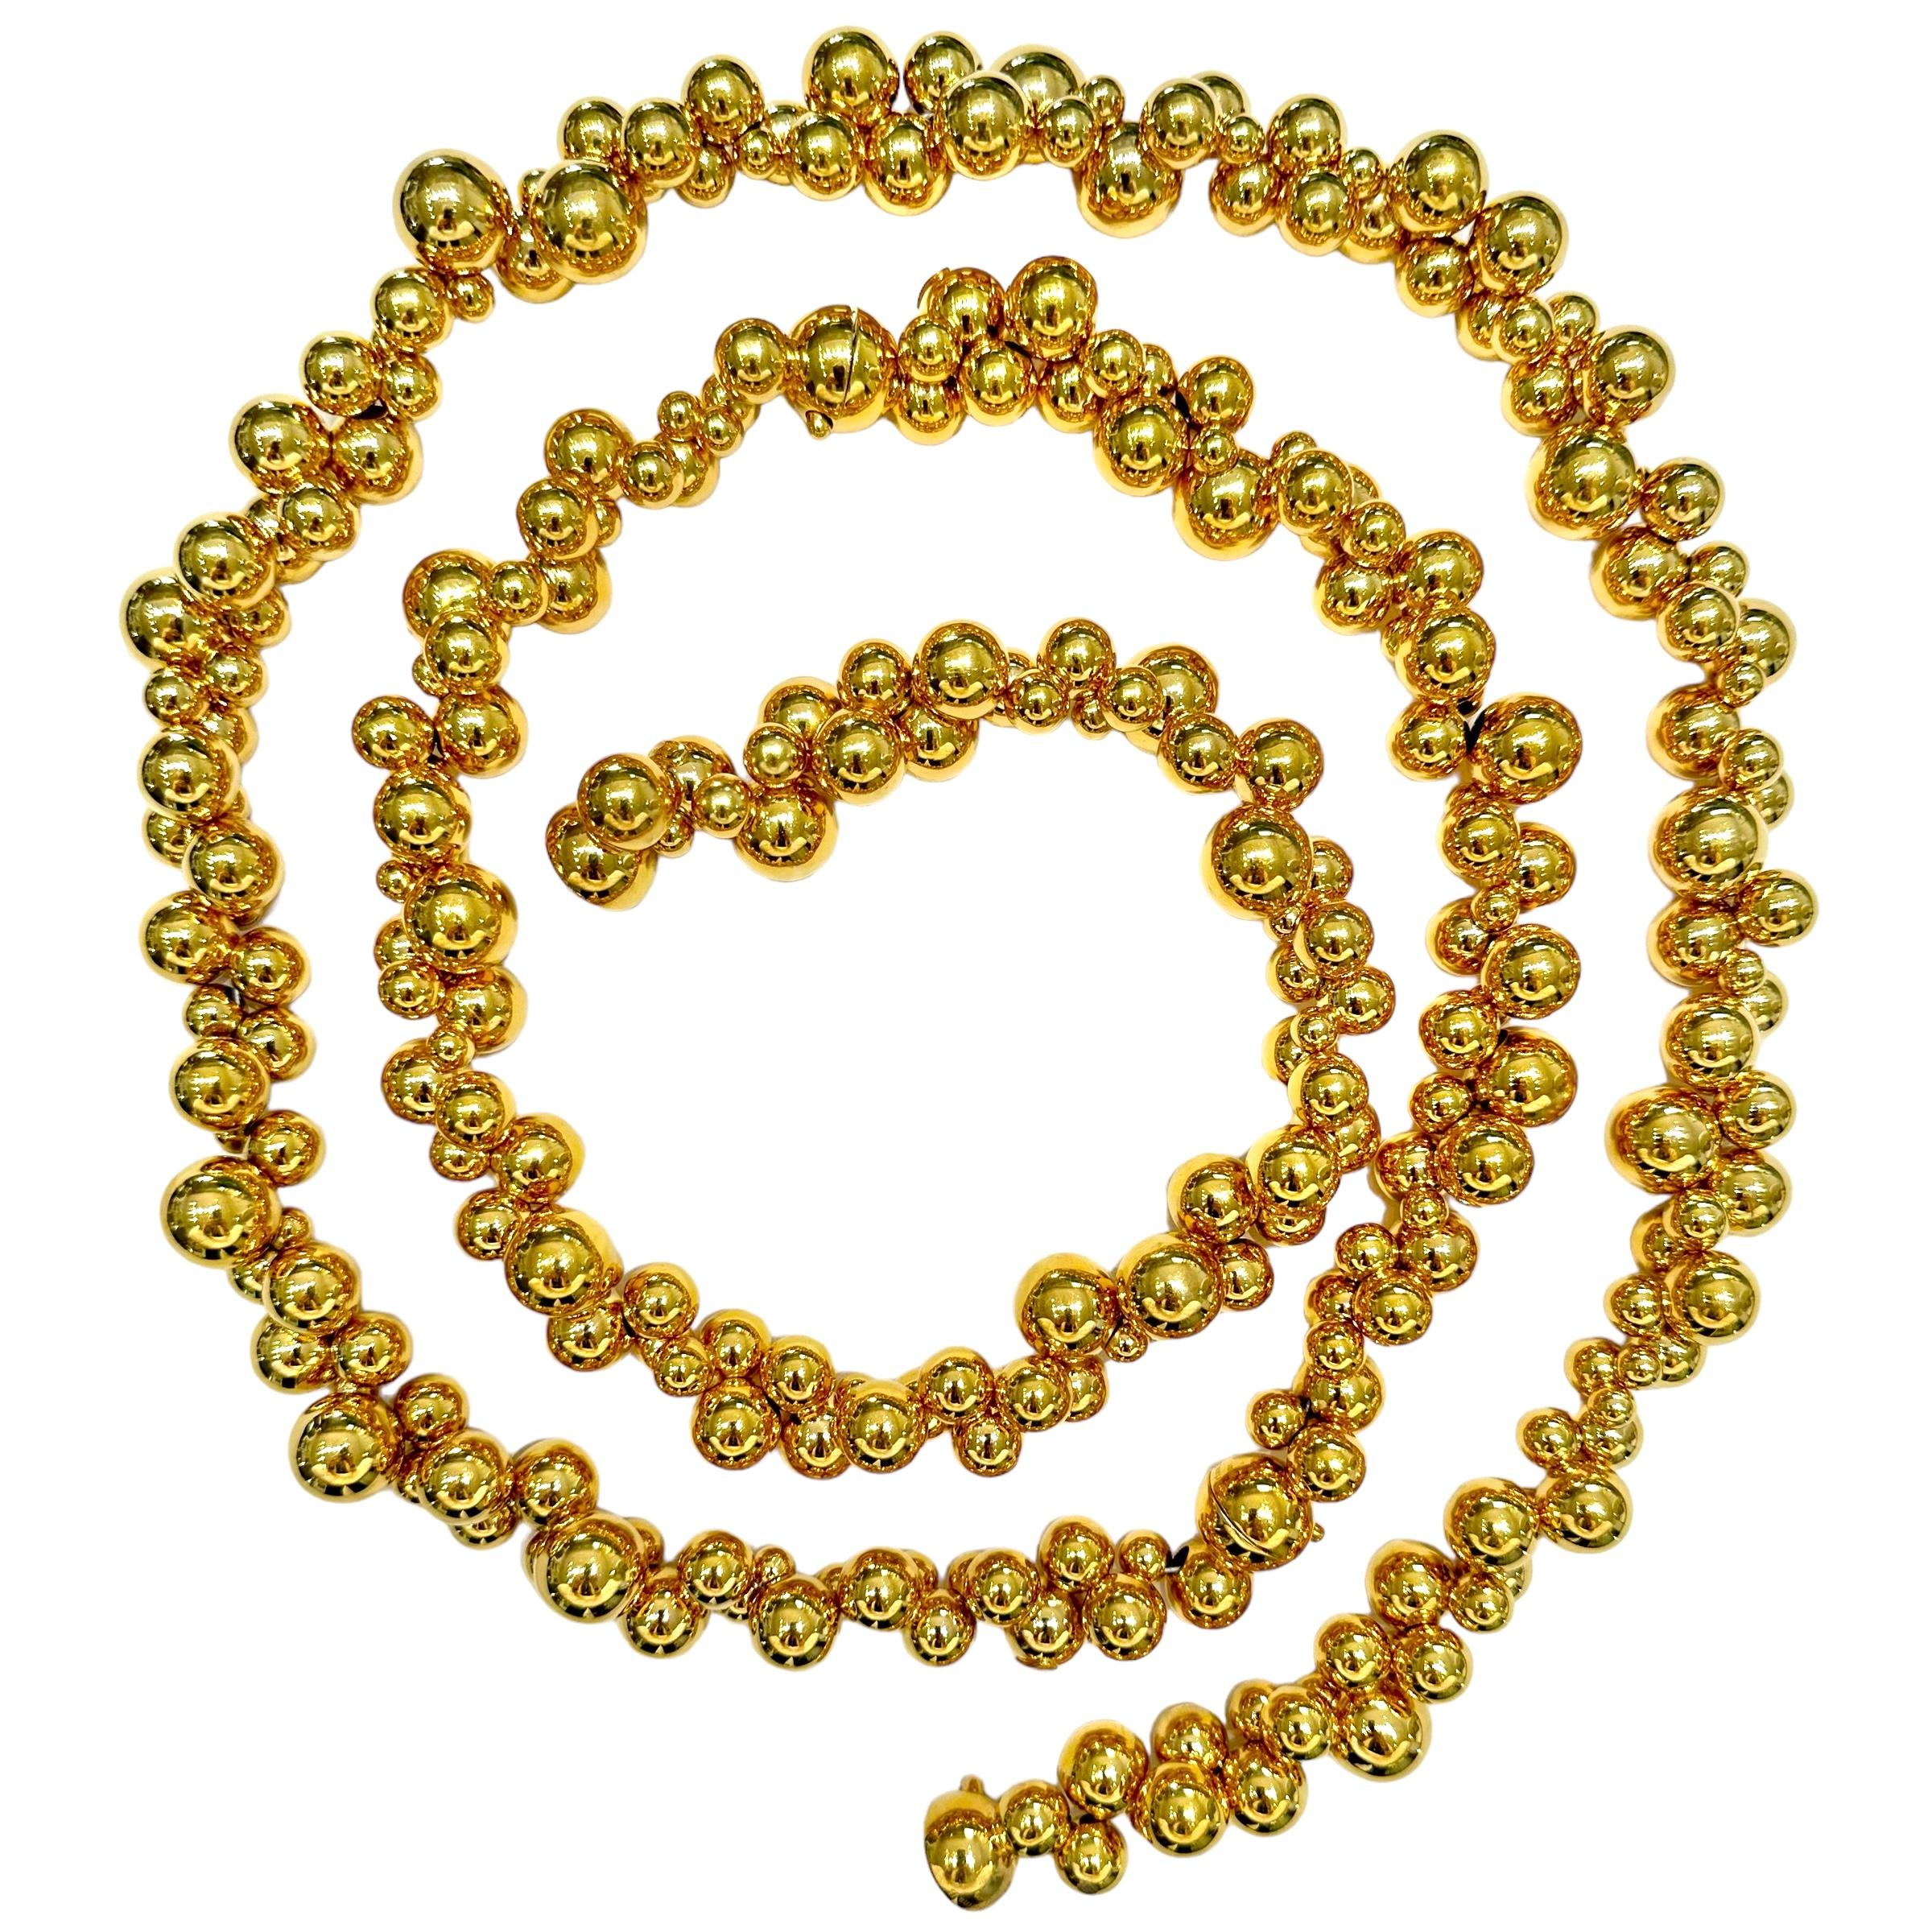 This particular 18k yellow gold Marina B Atomo necklace, bracelet combination truly  represents  the epitome of this model. When worn together as a single strand, it measures an astonishing 49 inches in length. When separated it is comprised of